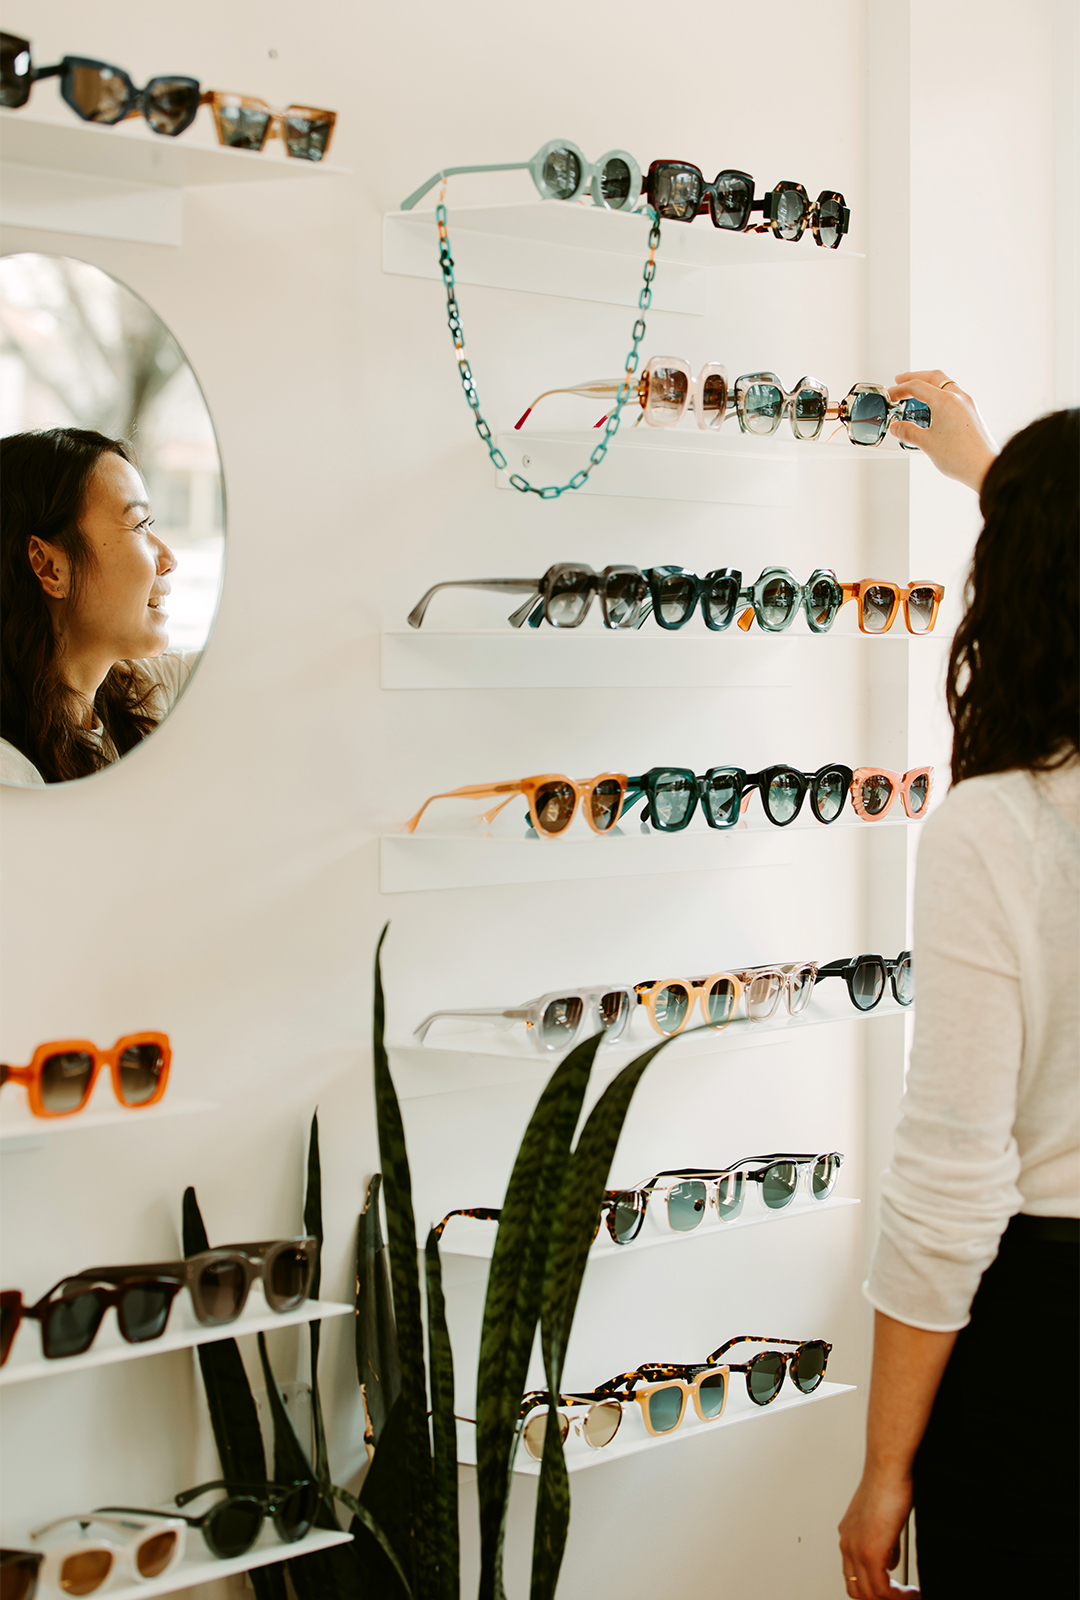 Alison Wong, owner at Peep Optical, selecting eyewear from a shelf in her store.